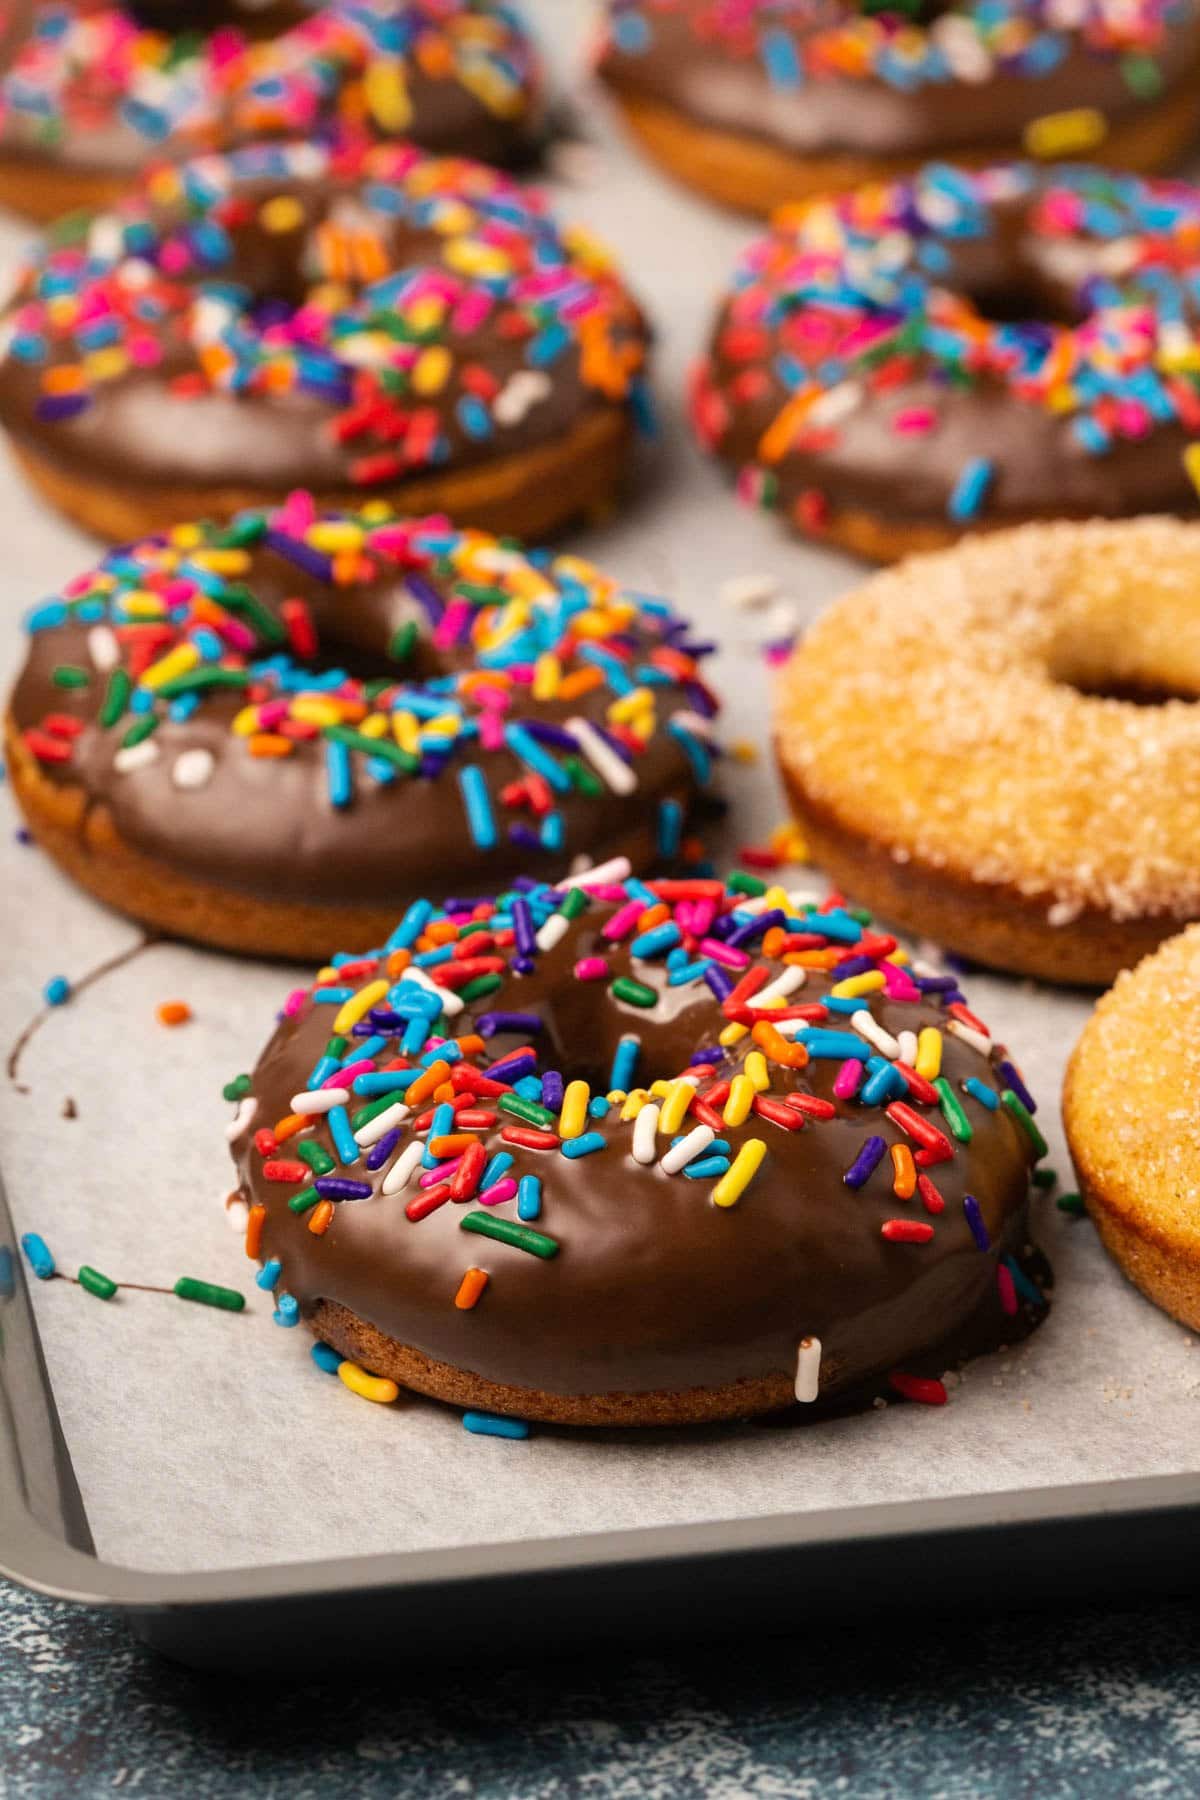 Vegan donuts topped with chocolate and sprinkles or cinnamon and sugar on a parchment lined baking sheet.